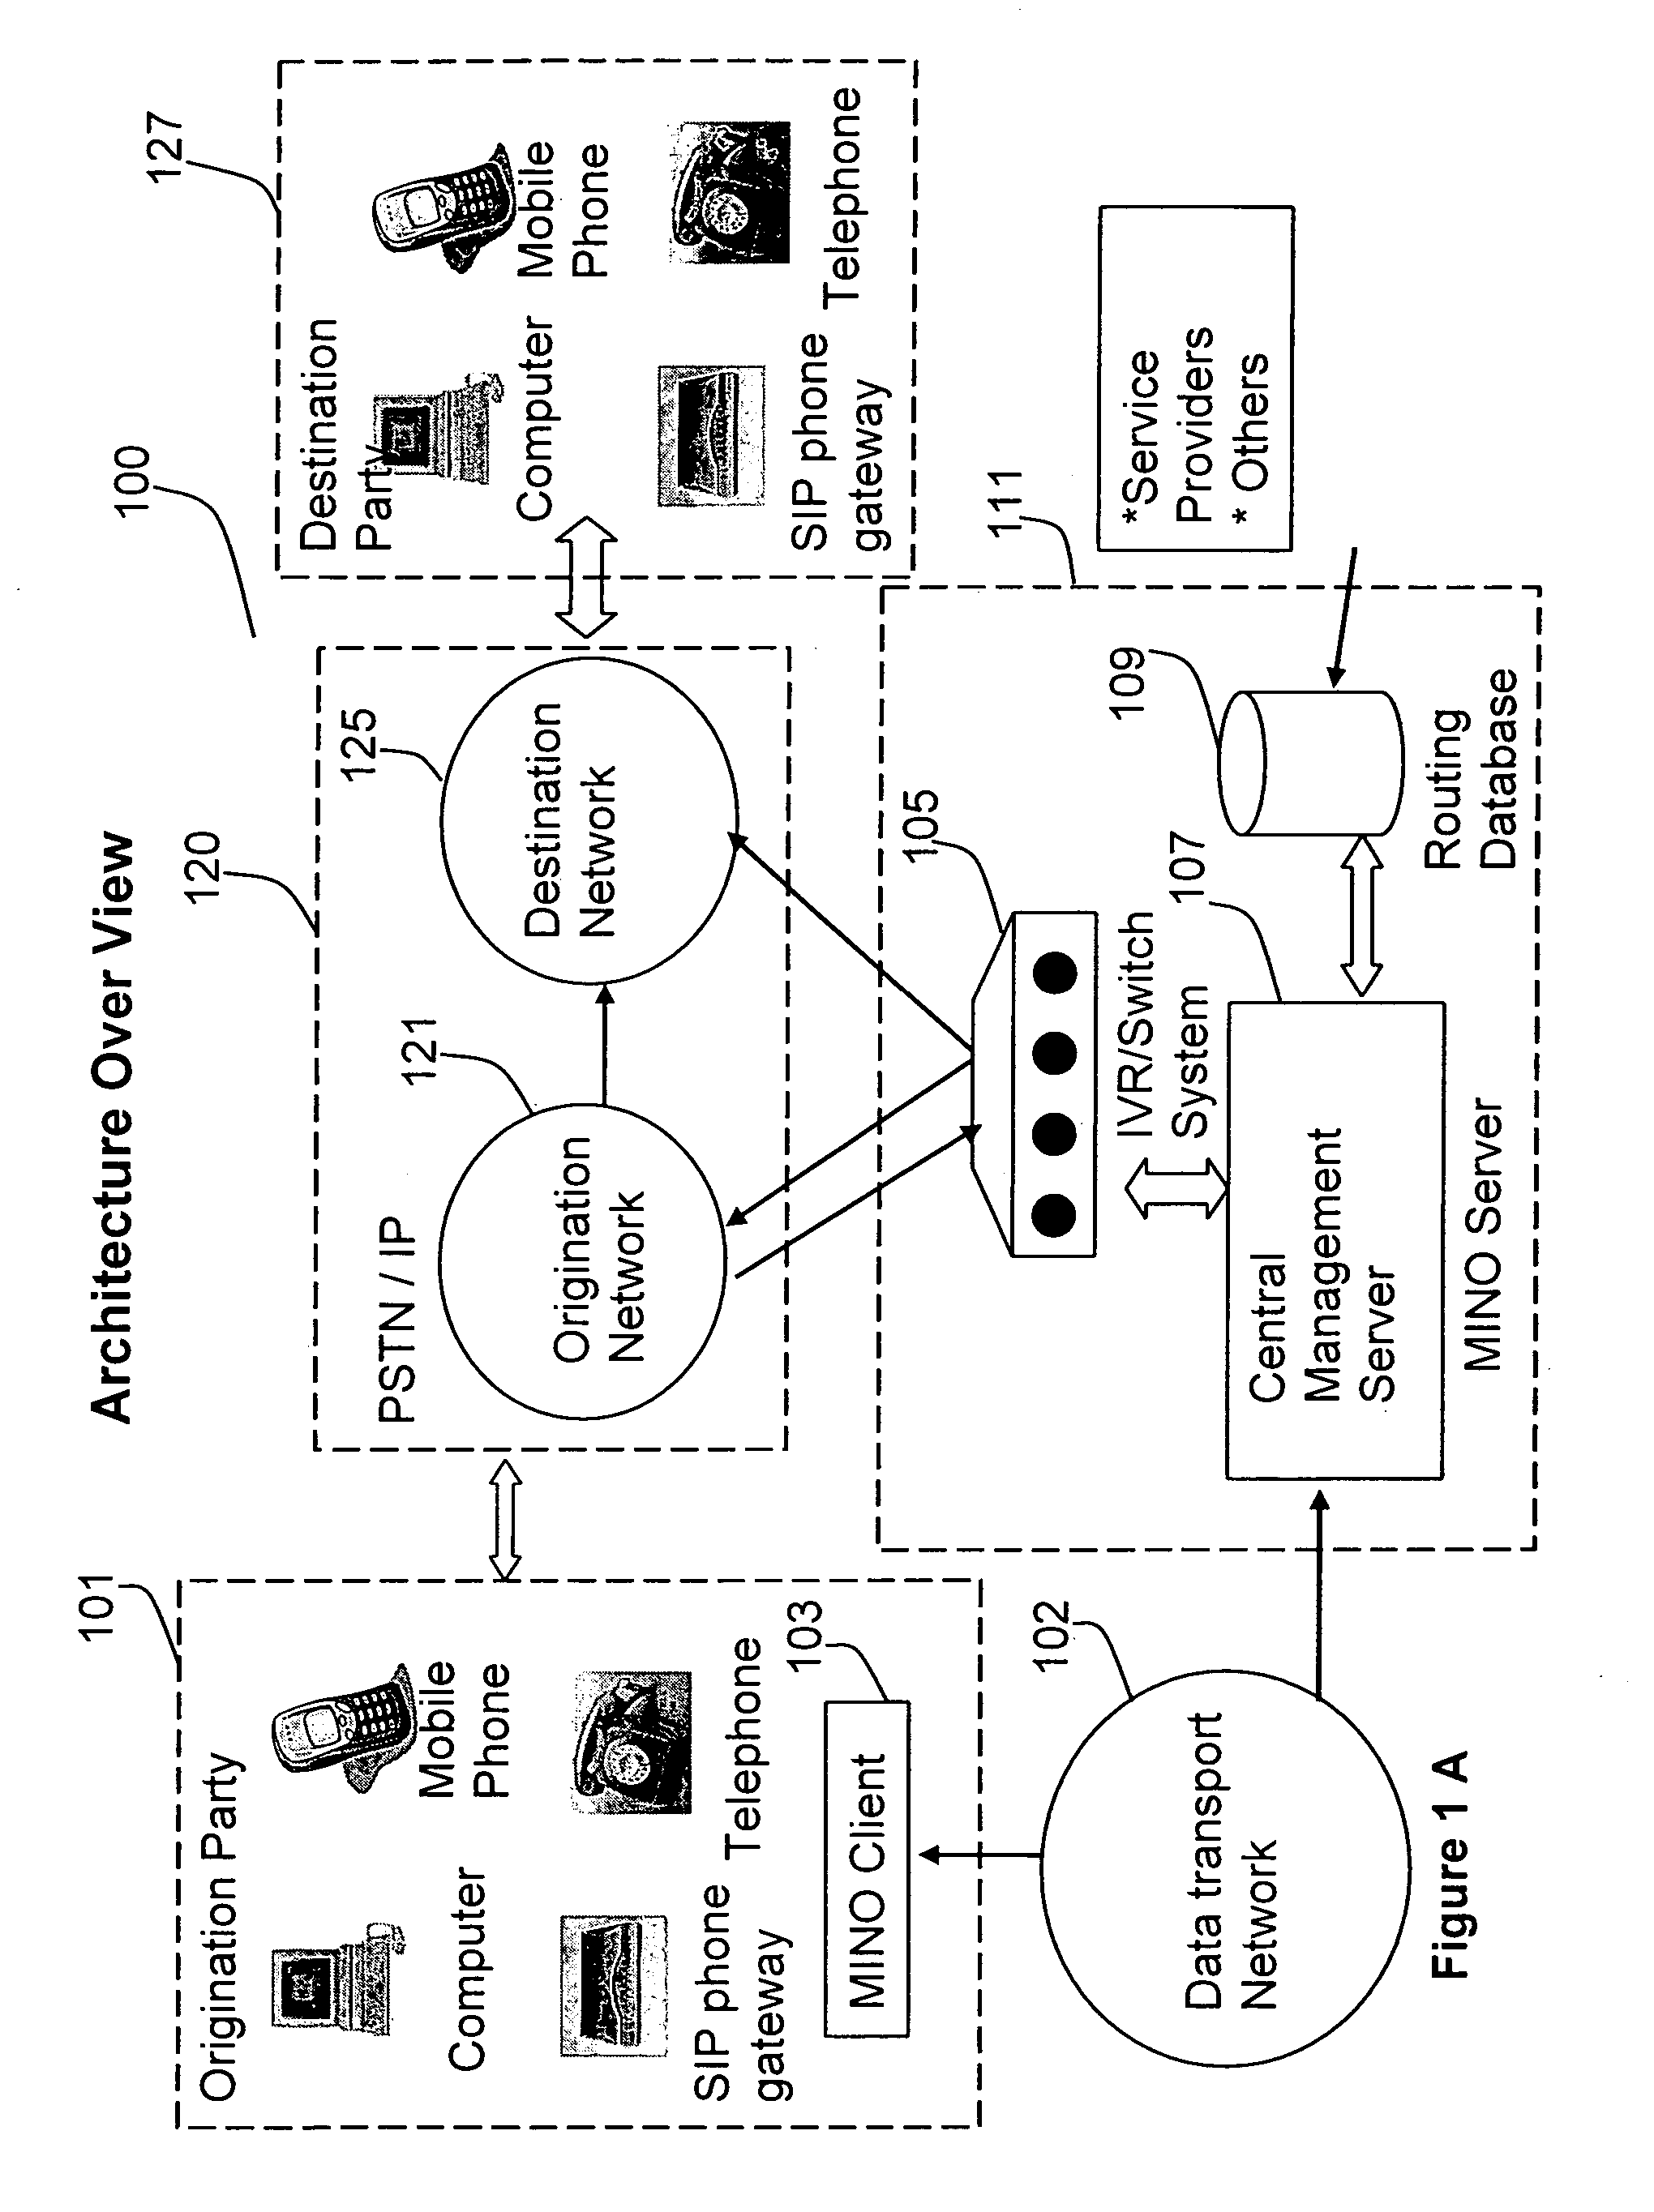 User interface method and system for cellular phone